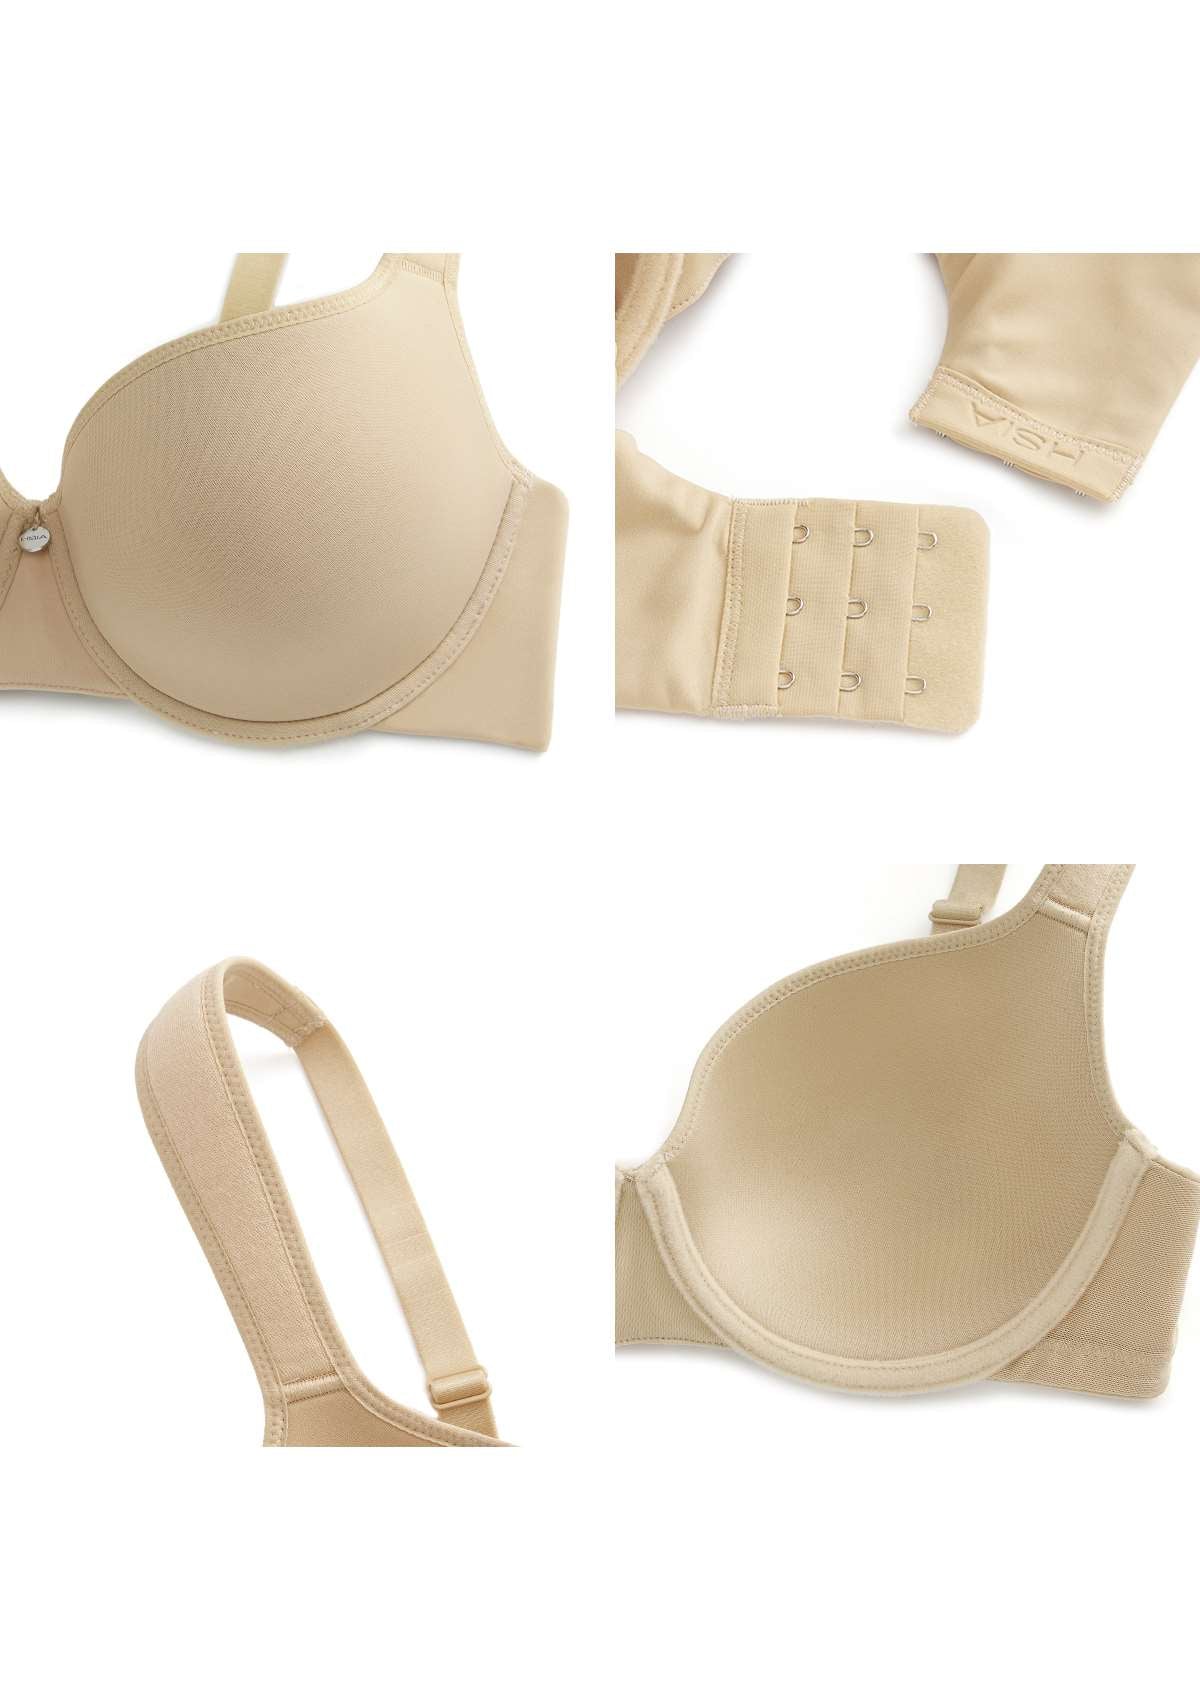 HSIA Patricia Seamless Lightly Padded Minimizer Bra -for Bigger Busts - Beige / 34 / H